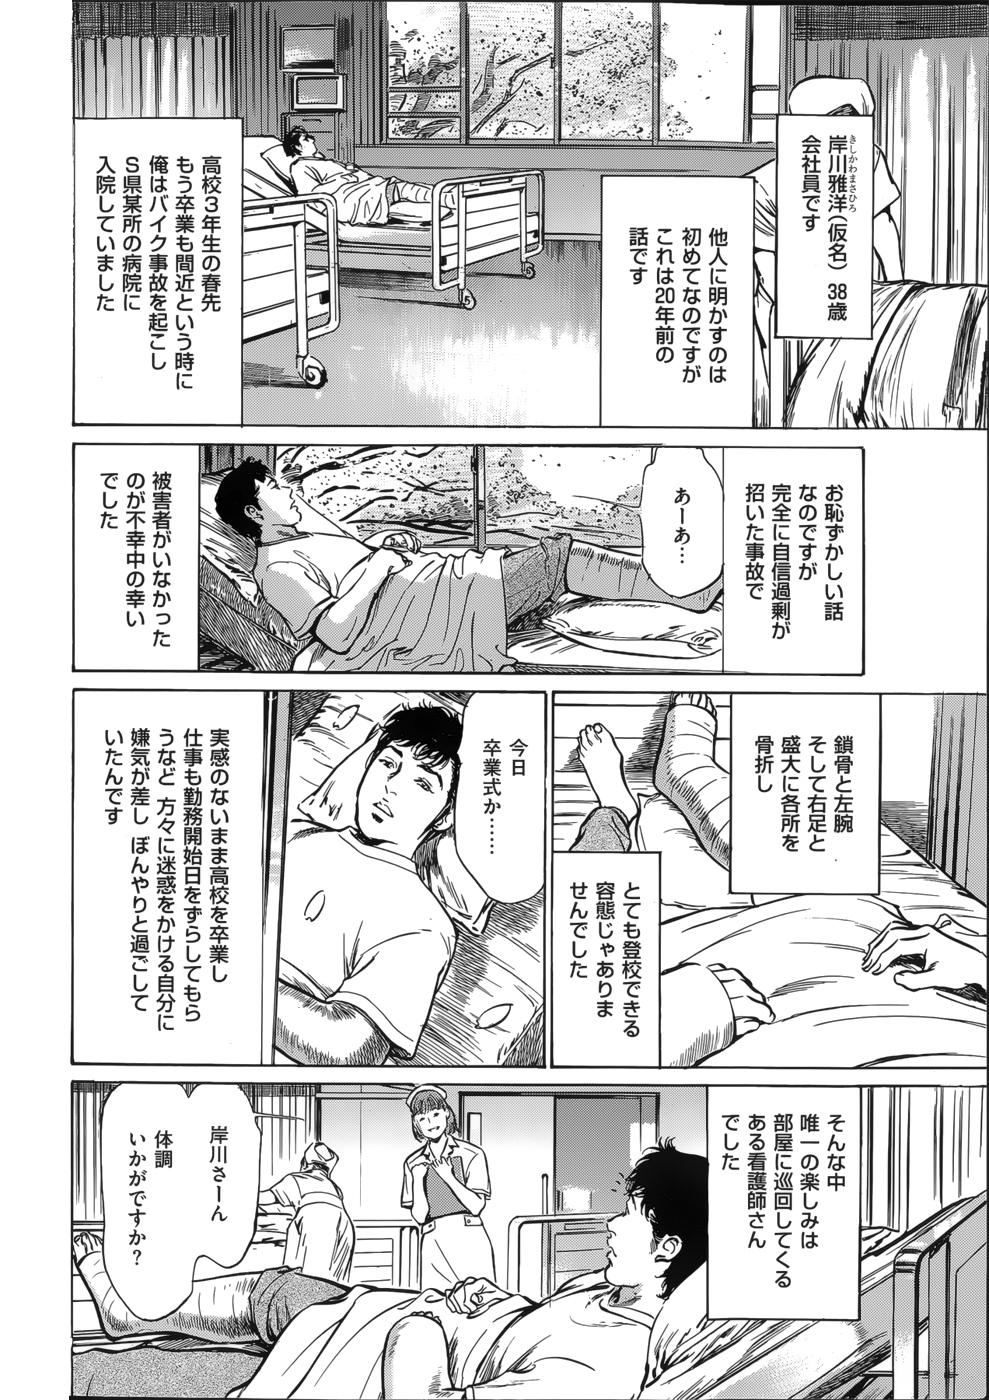 Twinks たまらない話 Ch.6-8 Kiss - Page 2